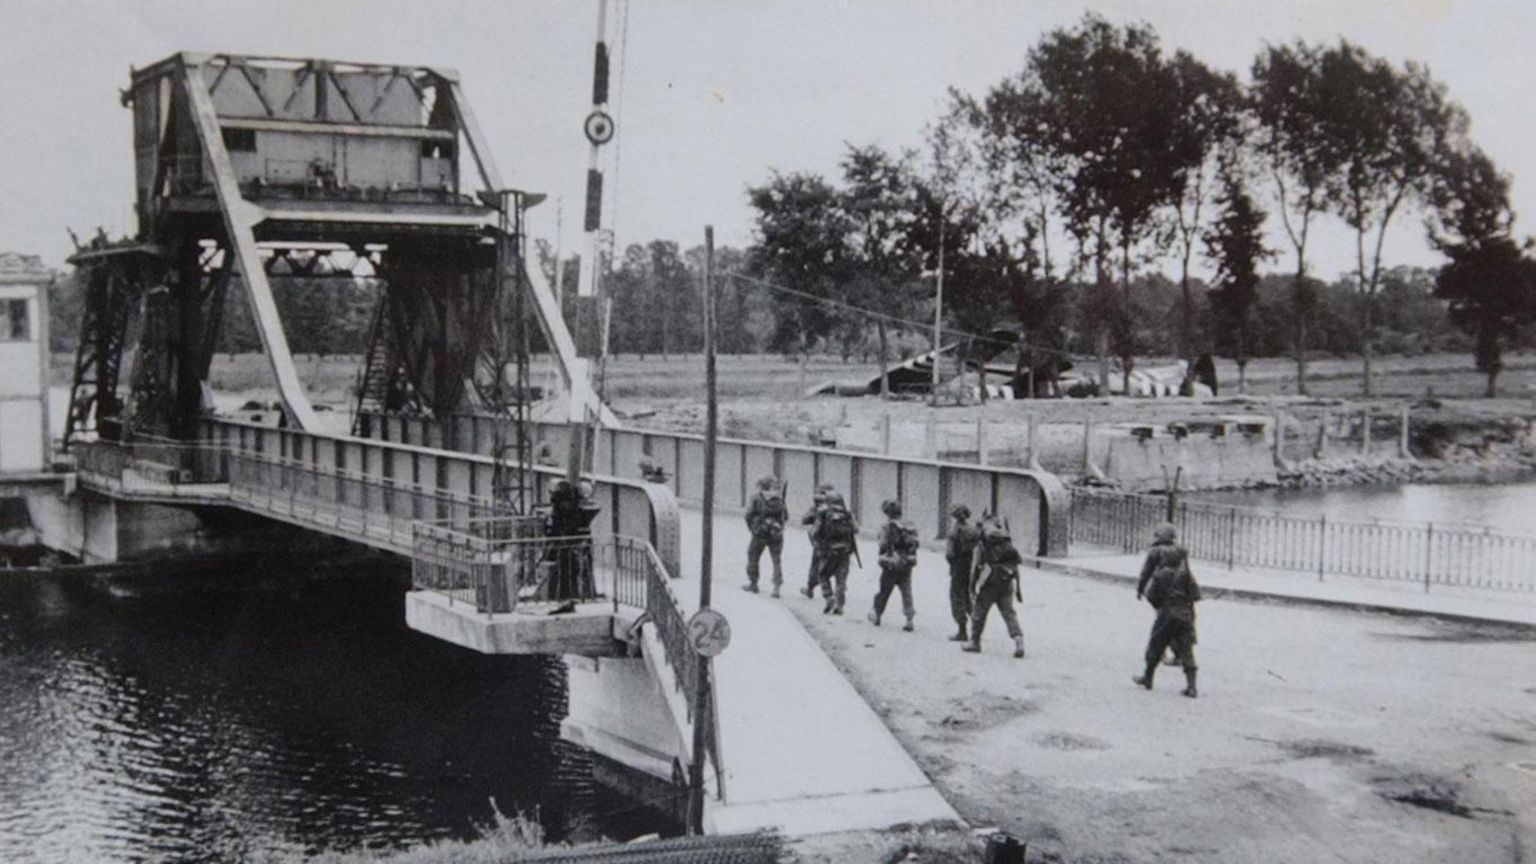 Troops crossing Pegasus Bridge - a black and white photo from 1944